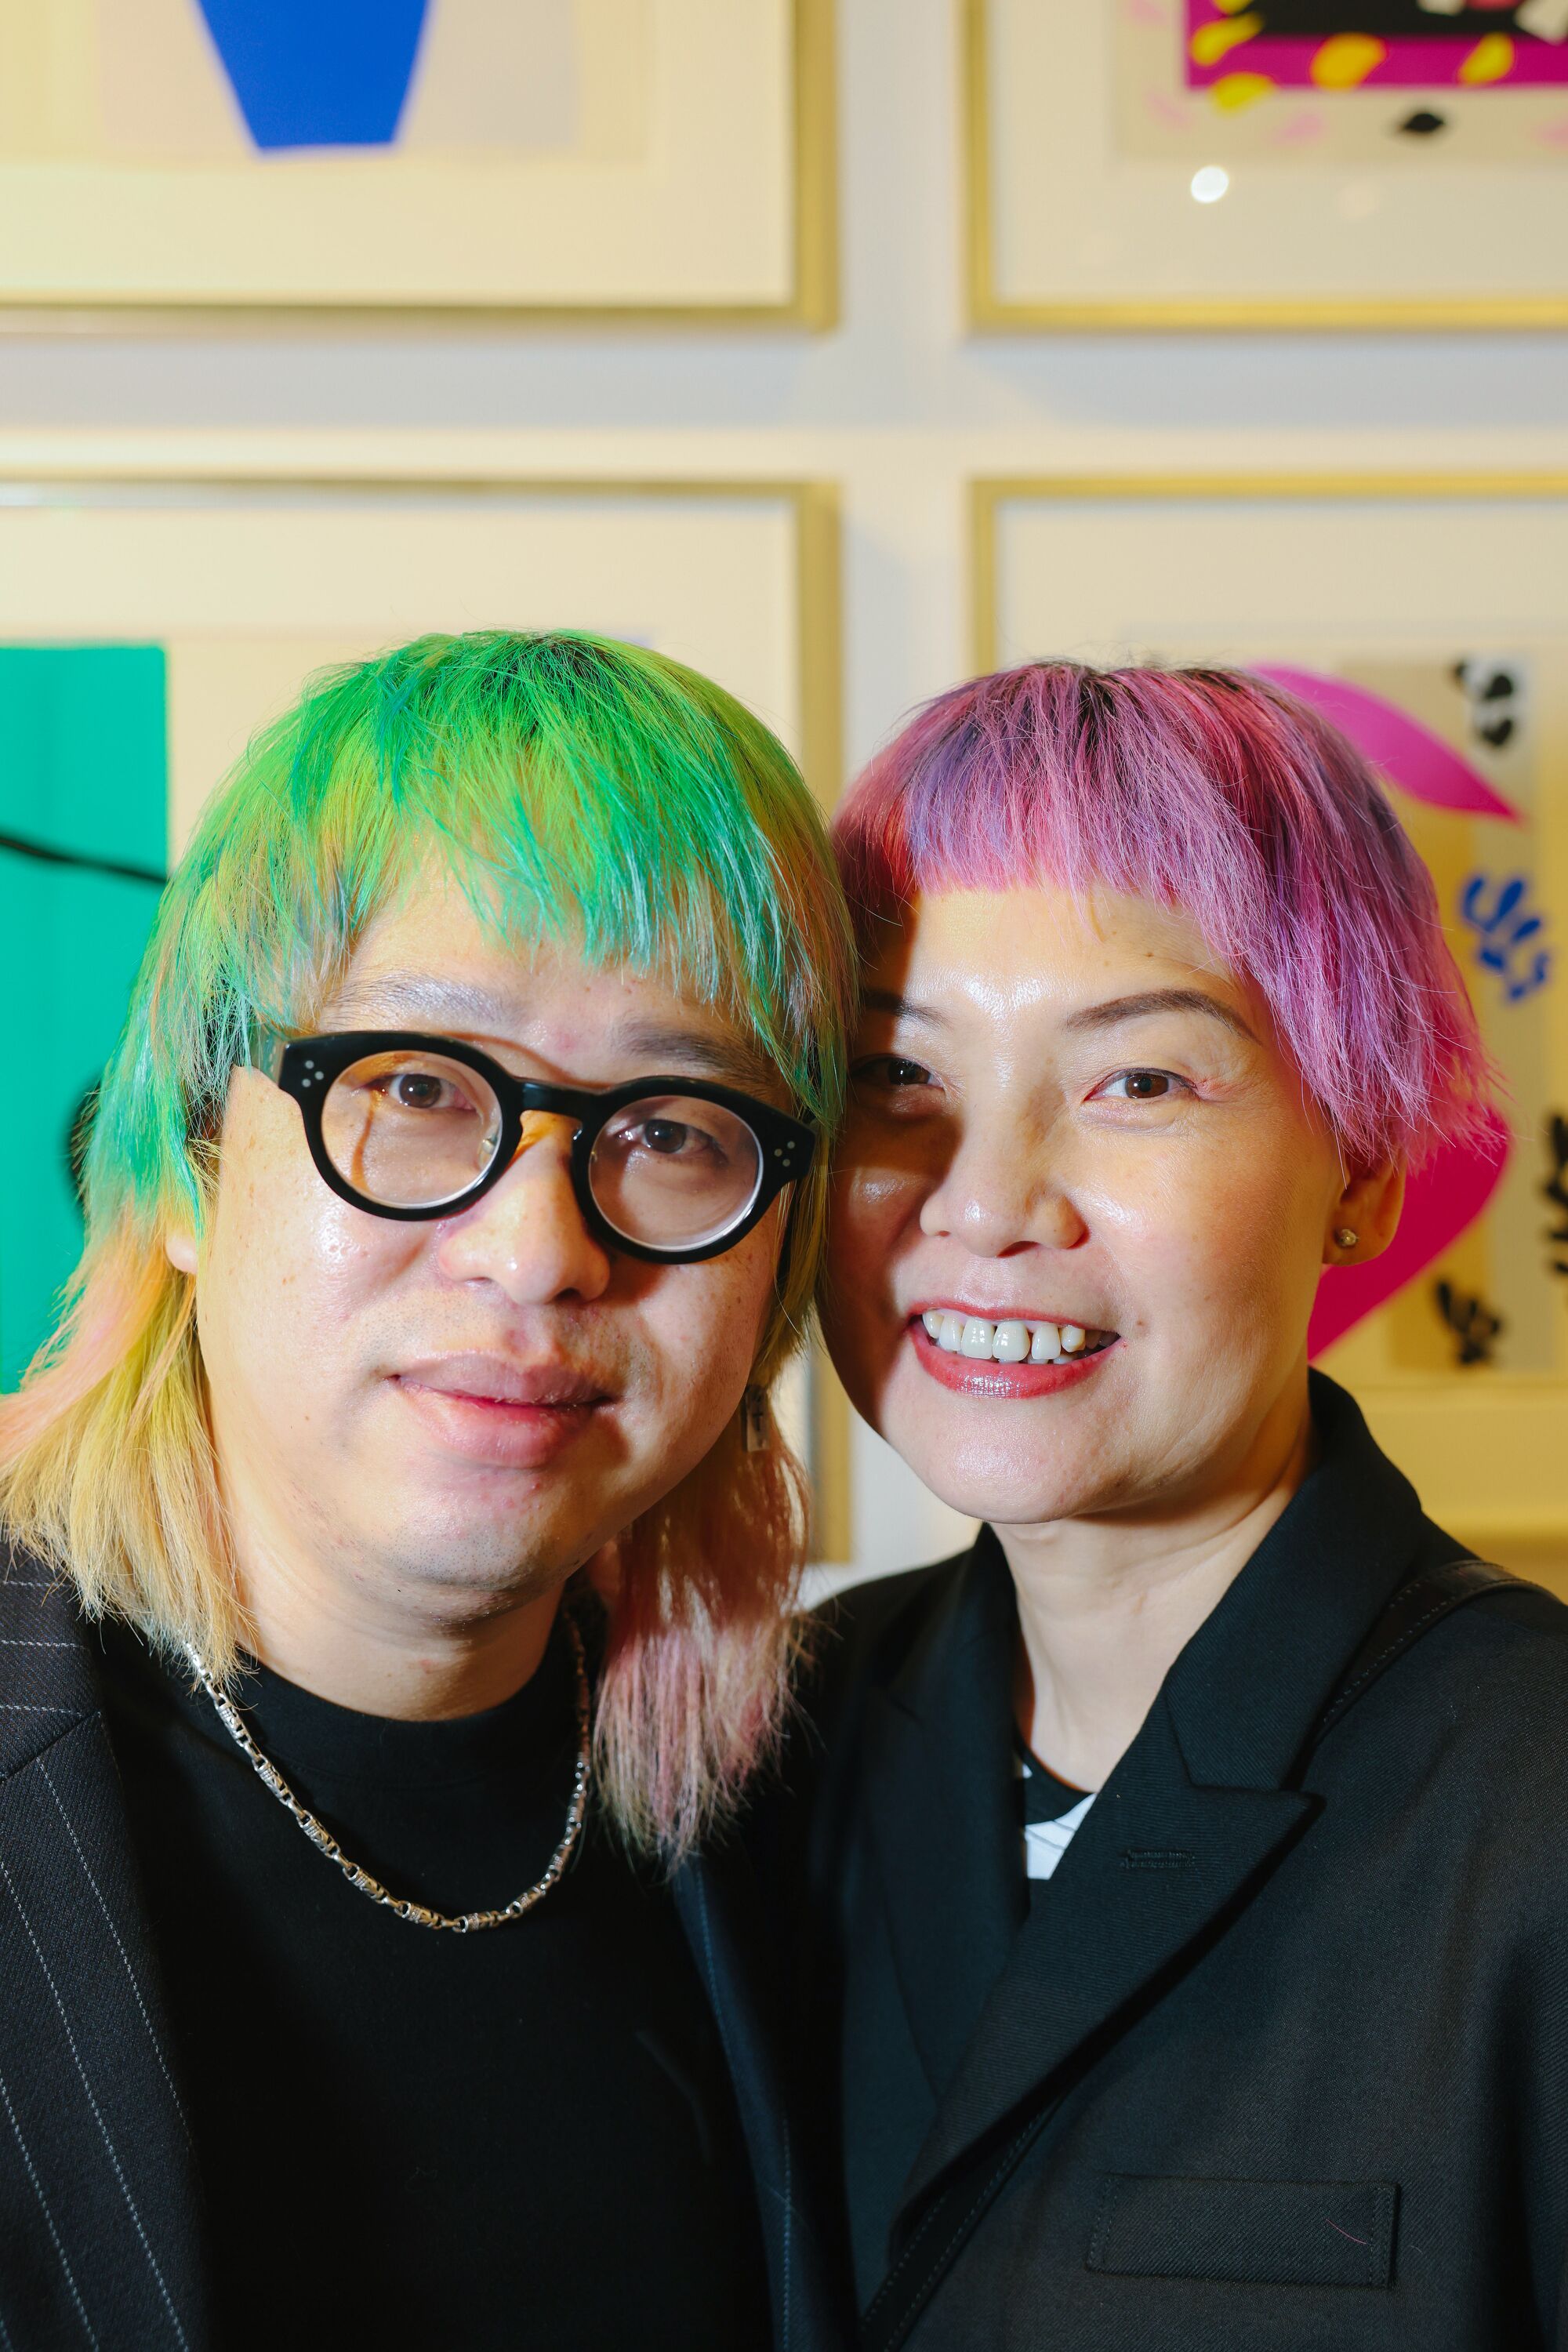 Two people with dyed hair (green, left and pink) pose for a photo.